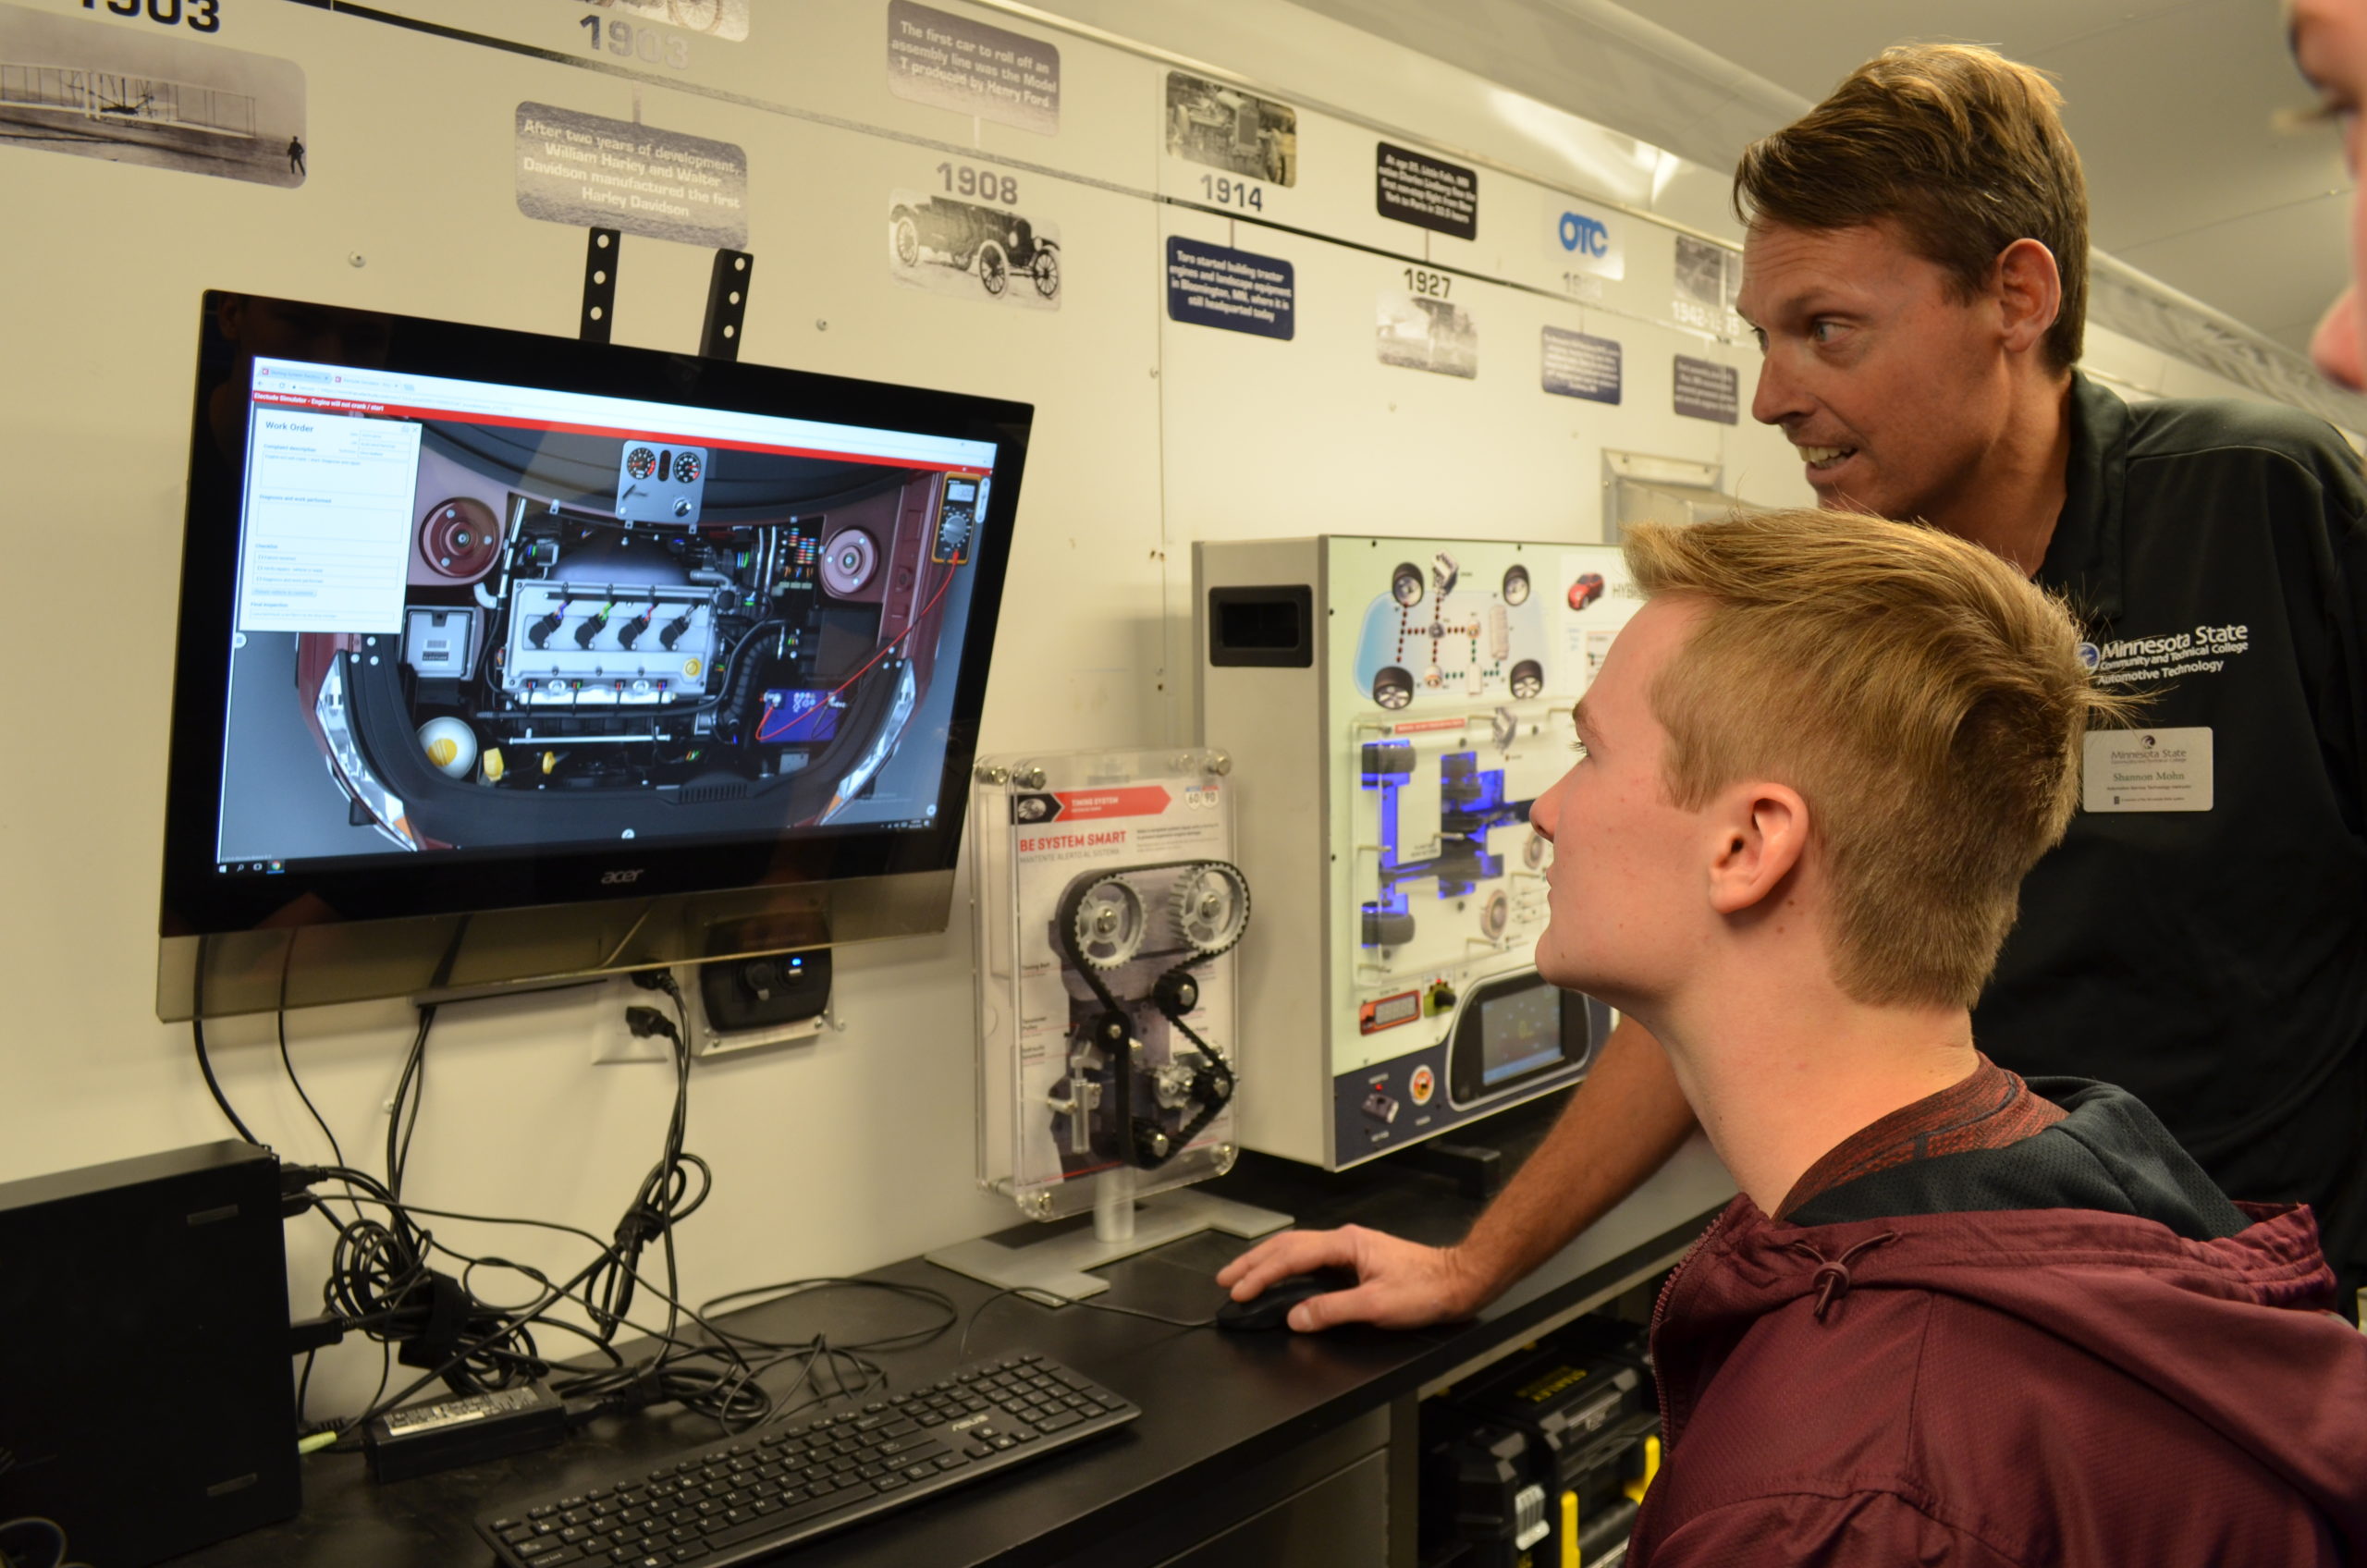 A student watching as a teacher explains an image on a computer in Grand Forks